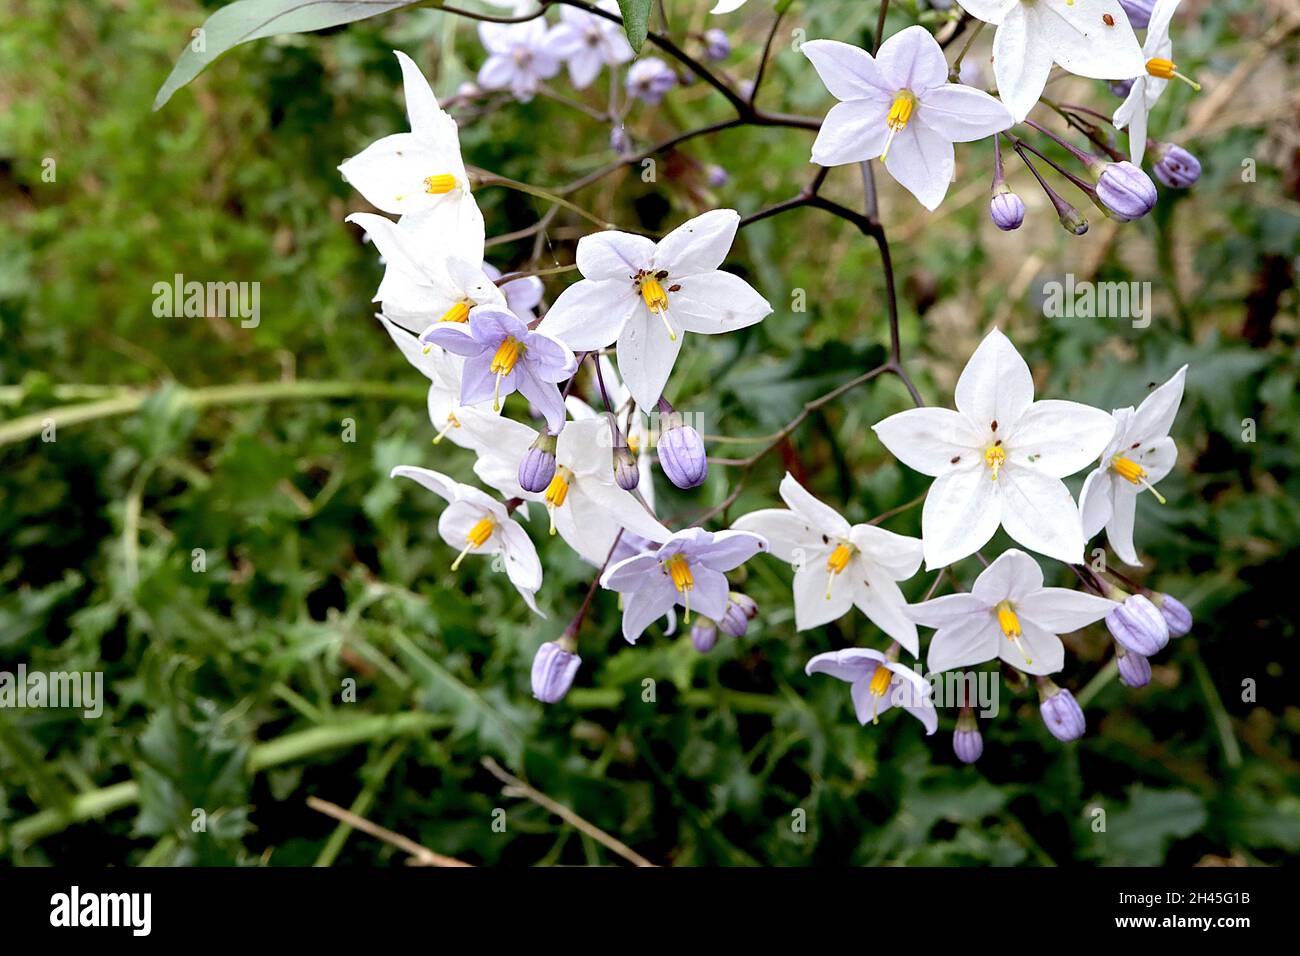 Solanum laxum ‘Bleu’ white potato vine - white star-shaped flowers and mauve flower buds in open clusters, October, England, UK Stock Photo